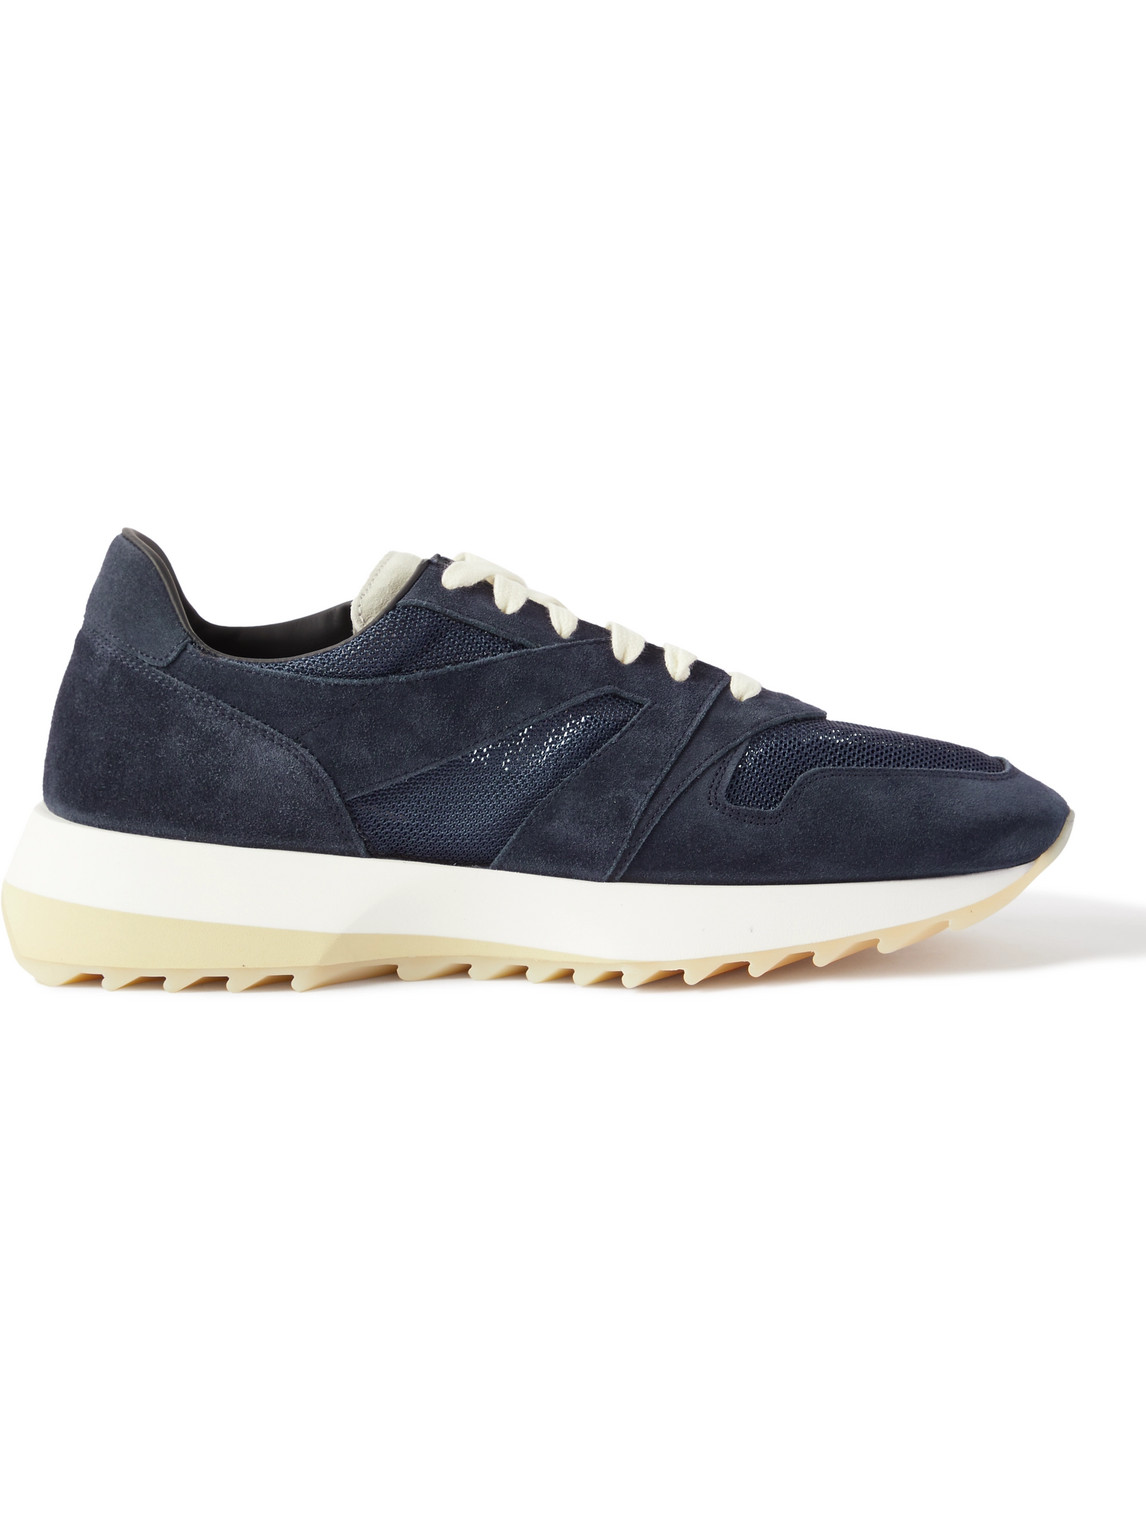 Panelled Suede and Mesh Sneakers